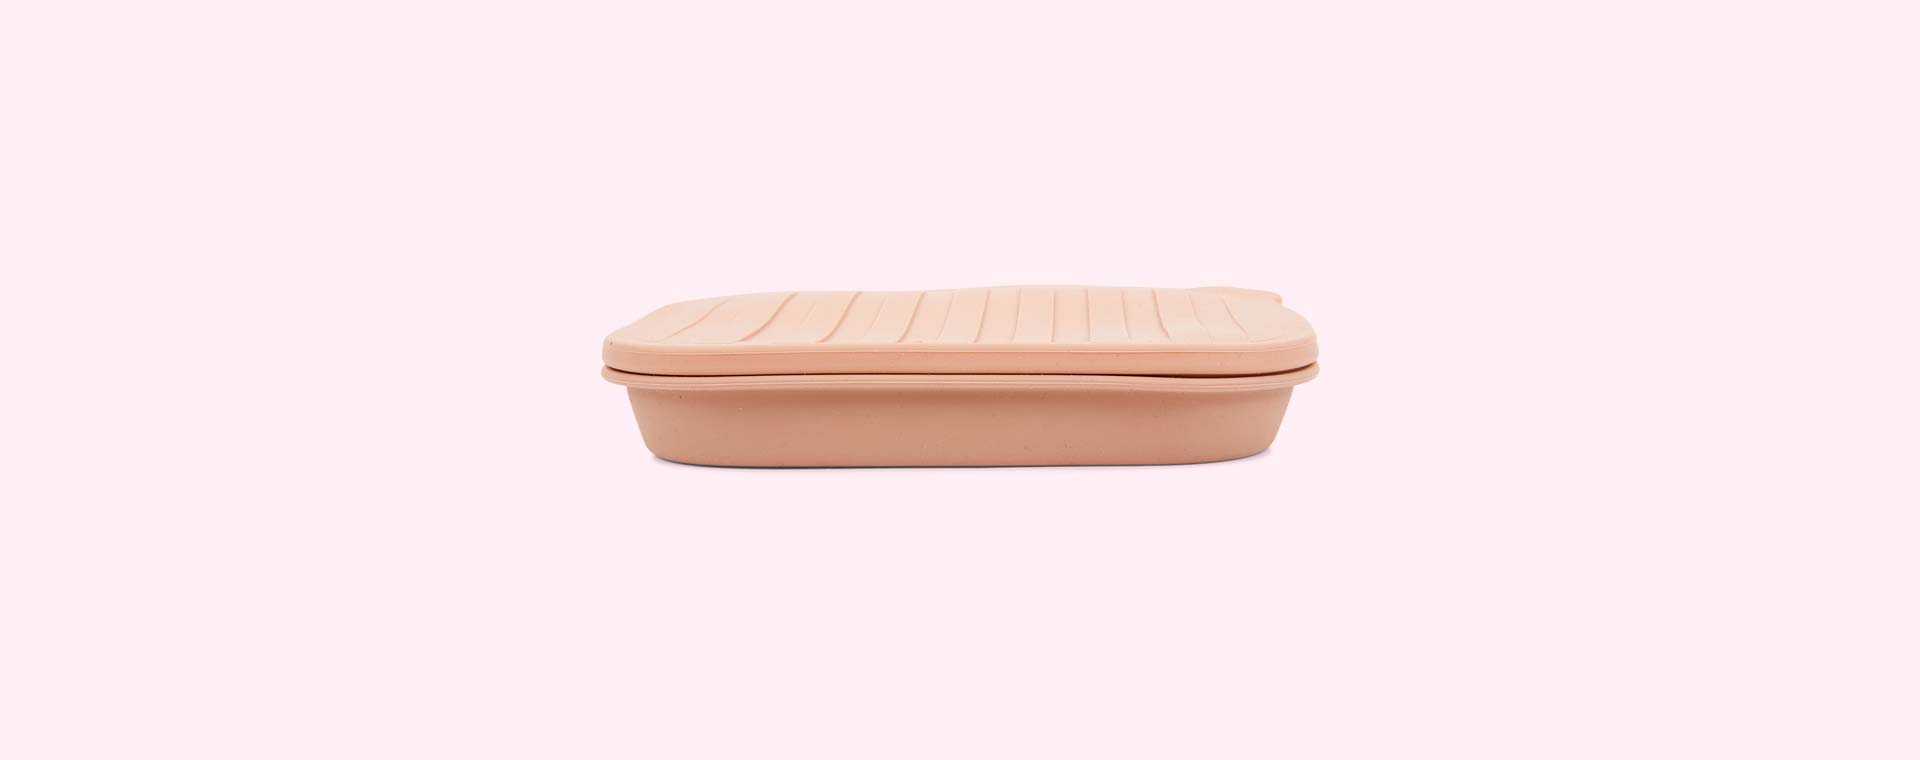 Tuscany Rose/Pale Tuscany Mix Liewood Franklin Foldable Lunch Box